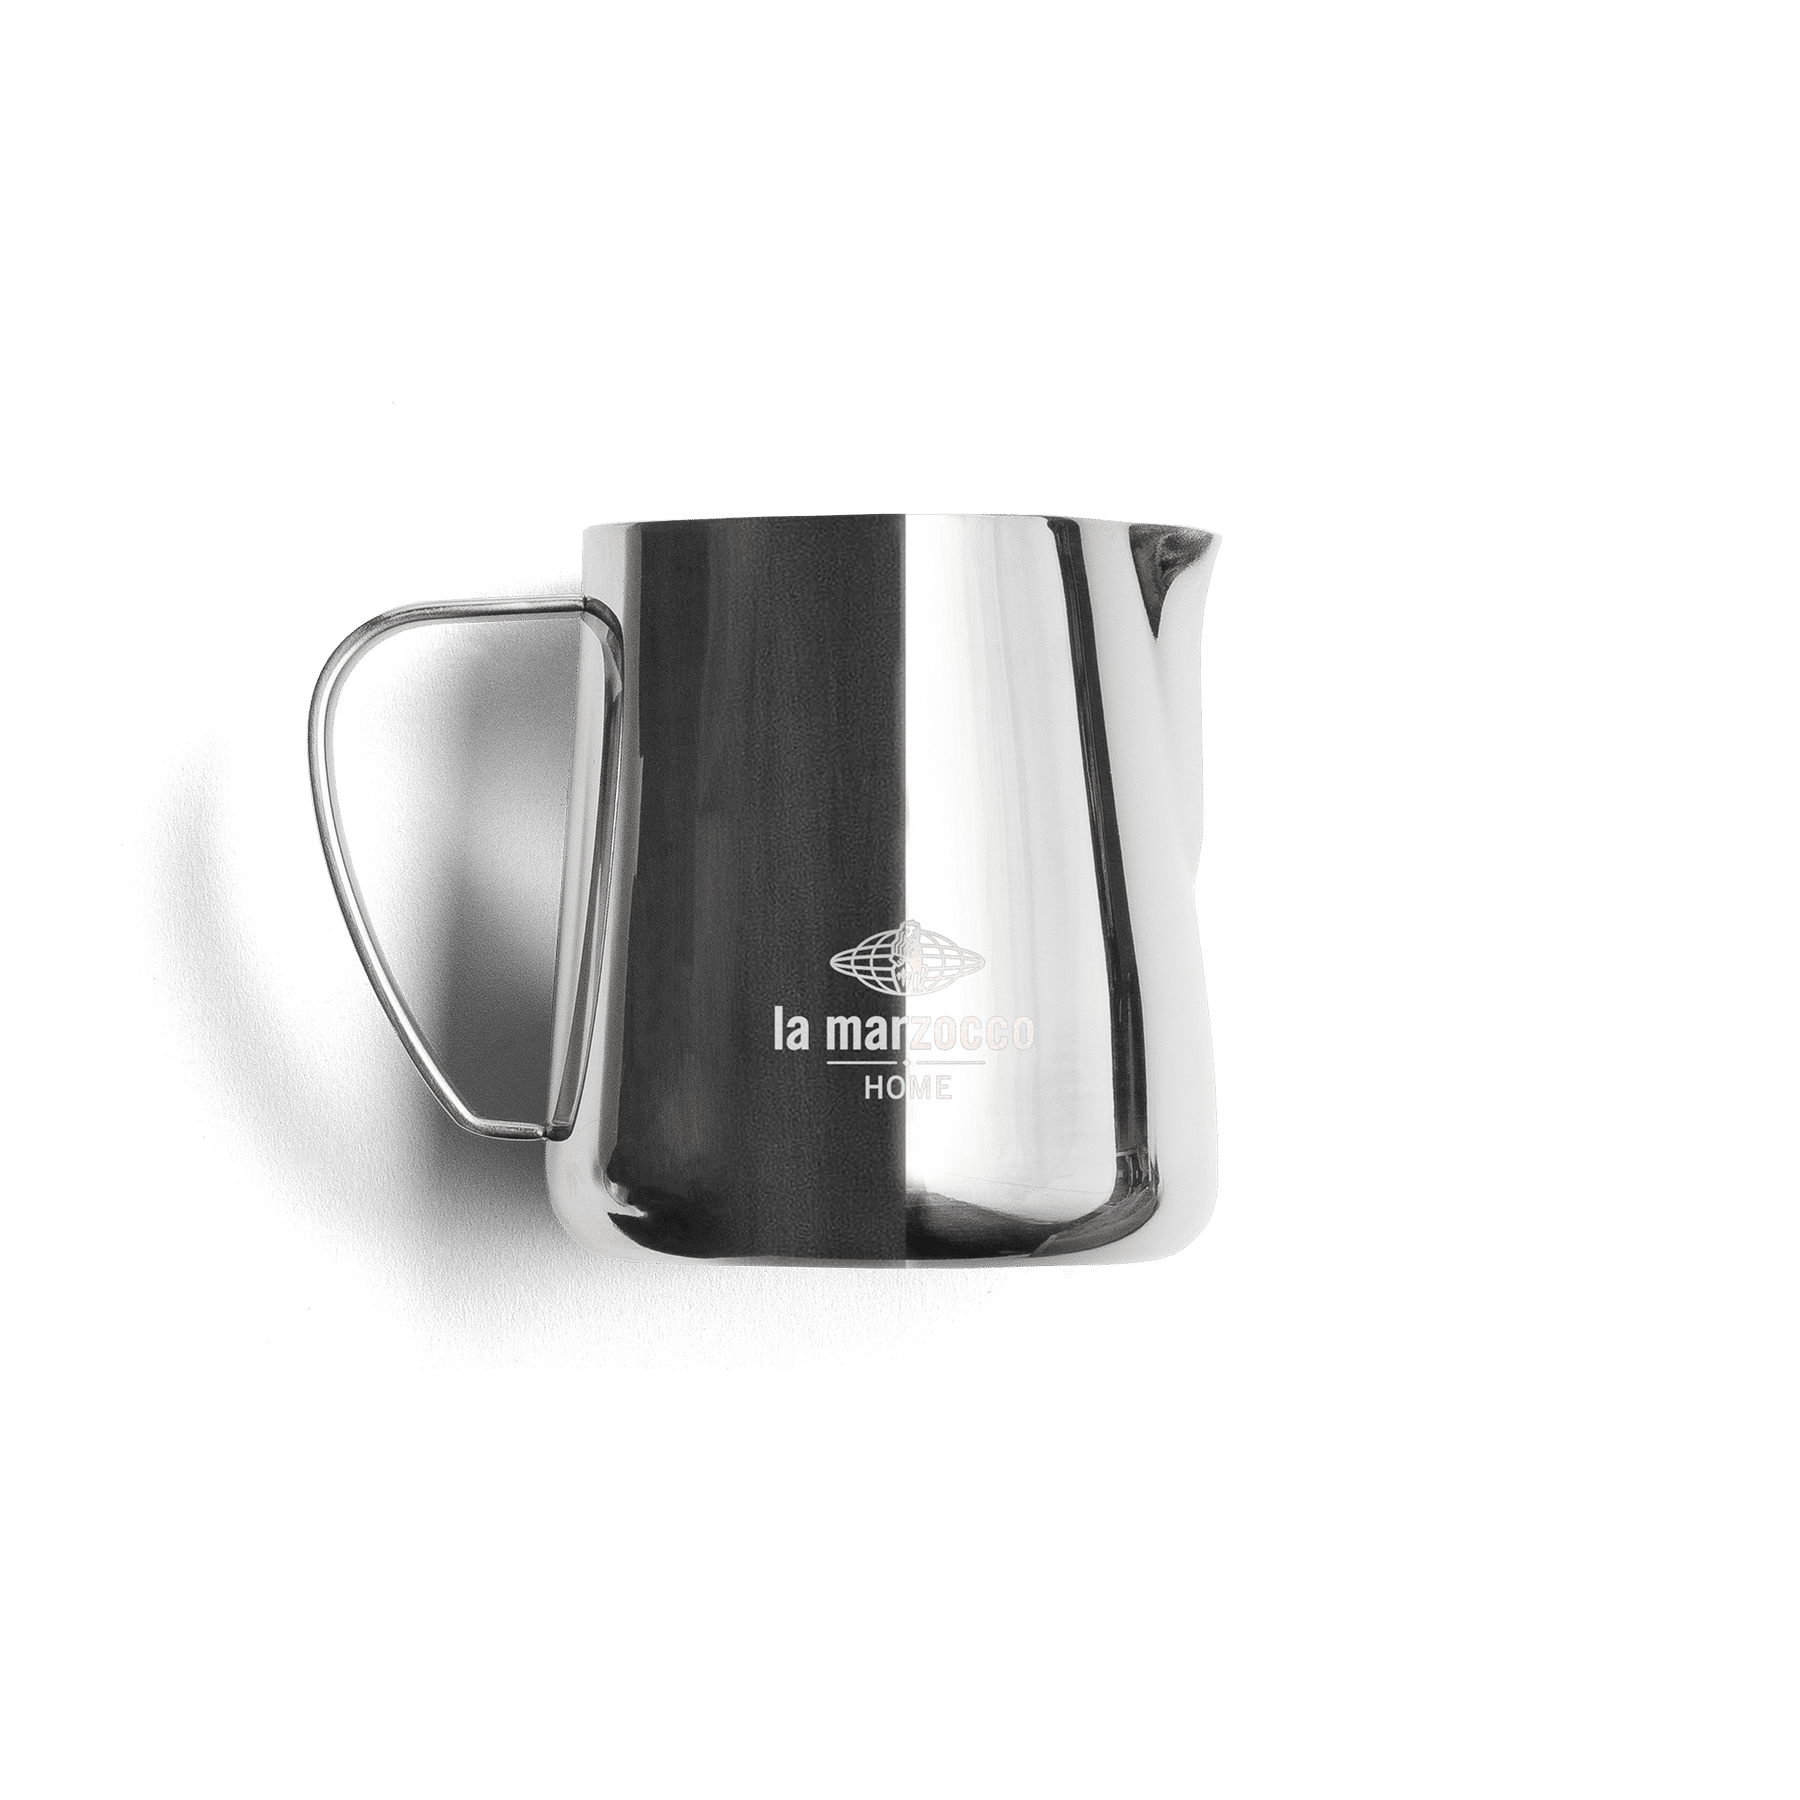 Stainless Steel Milk Frothing Pitcher - Milk Steamer Cup Jug